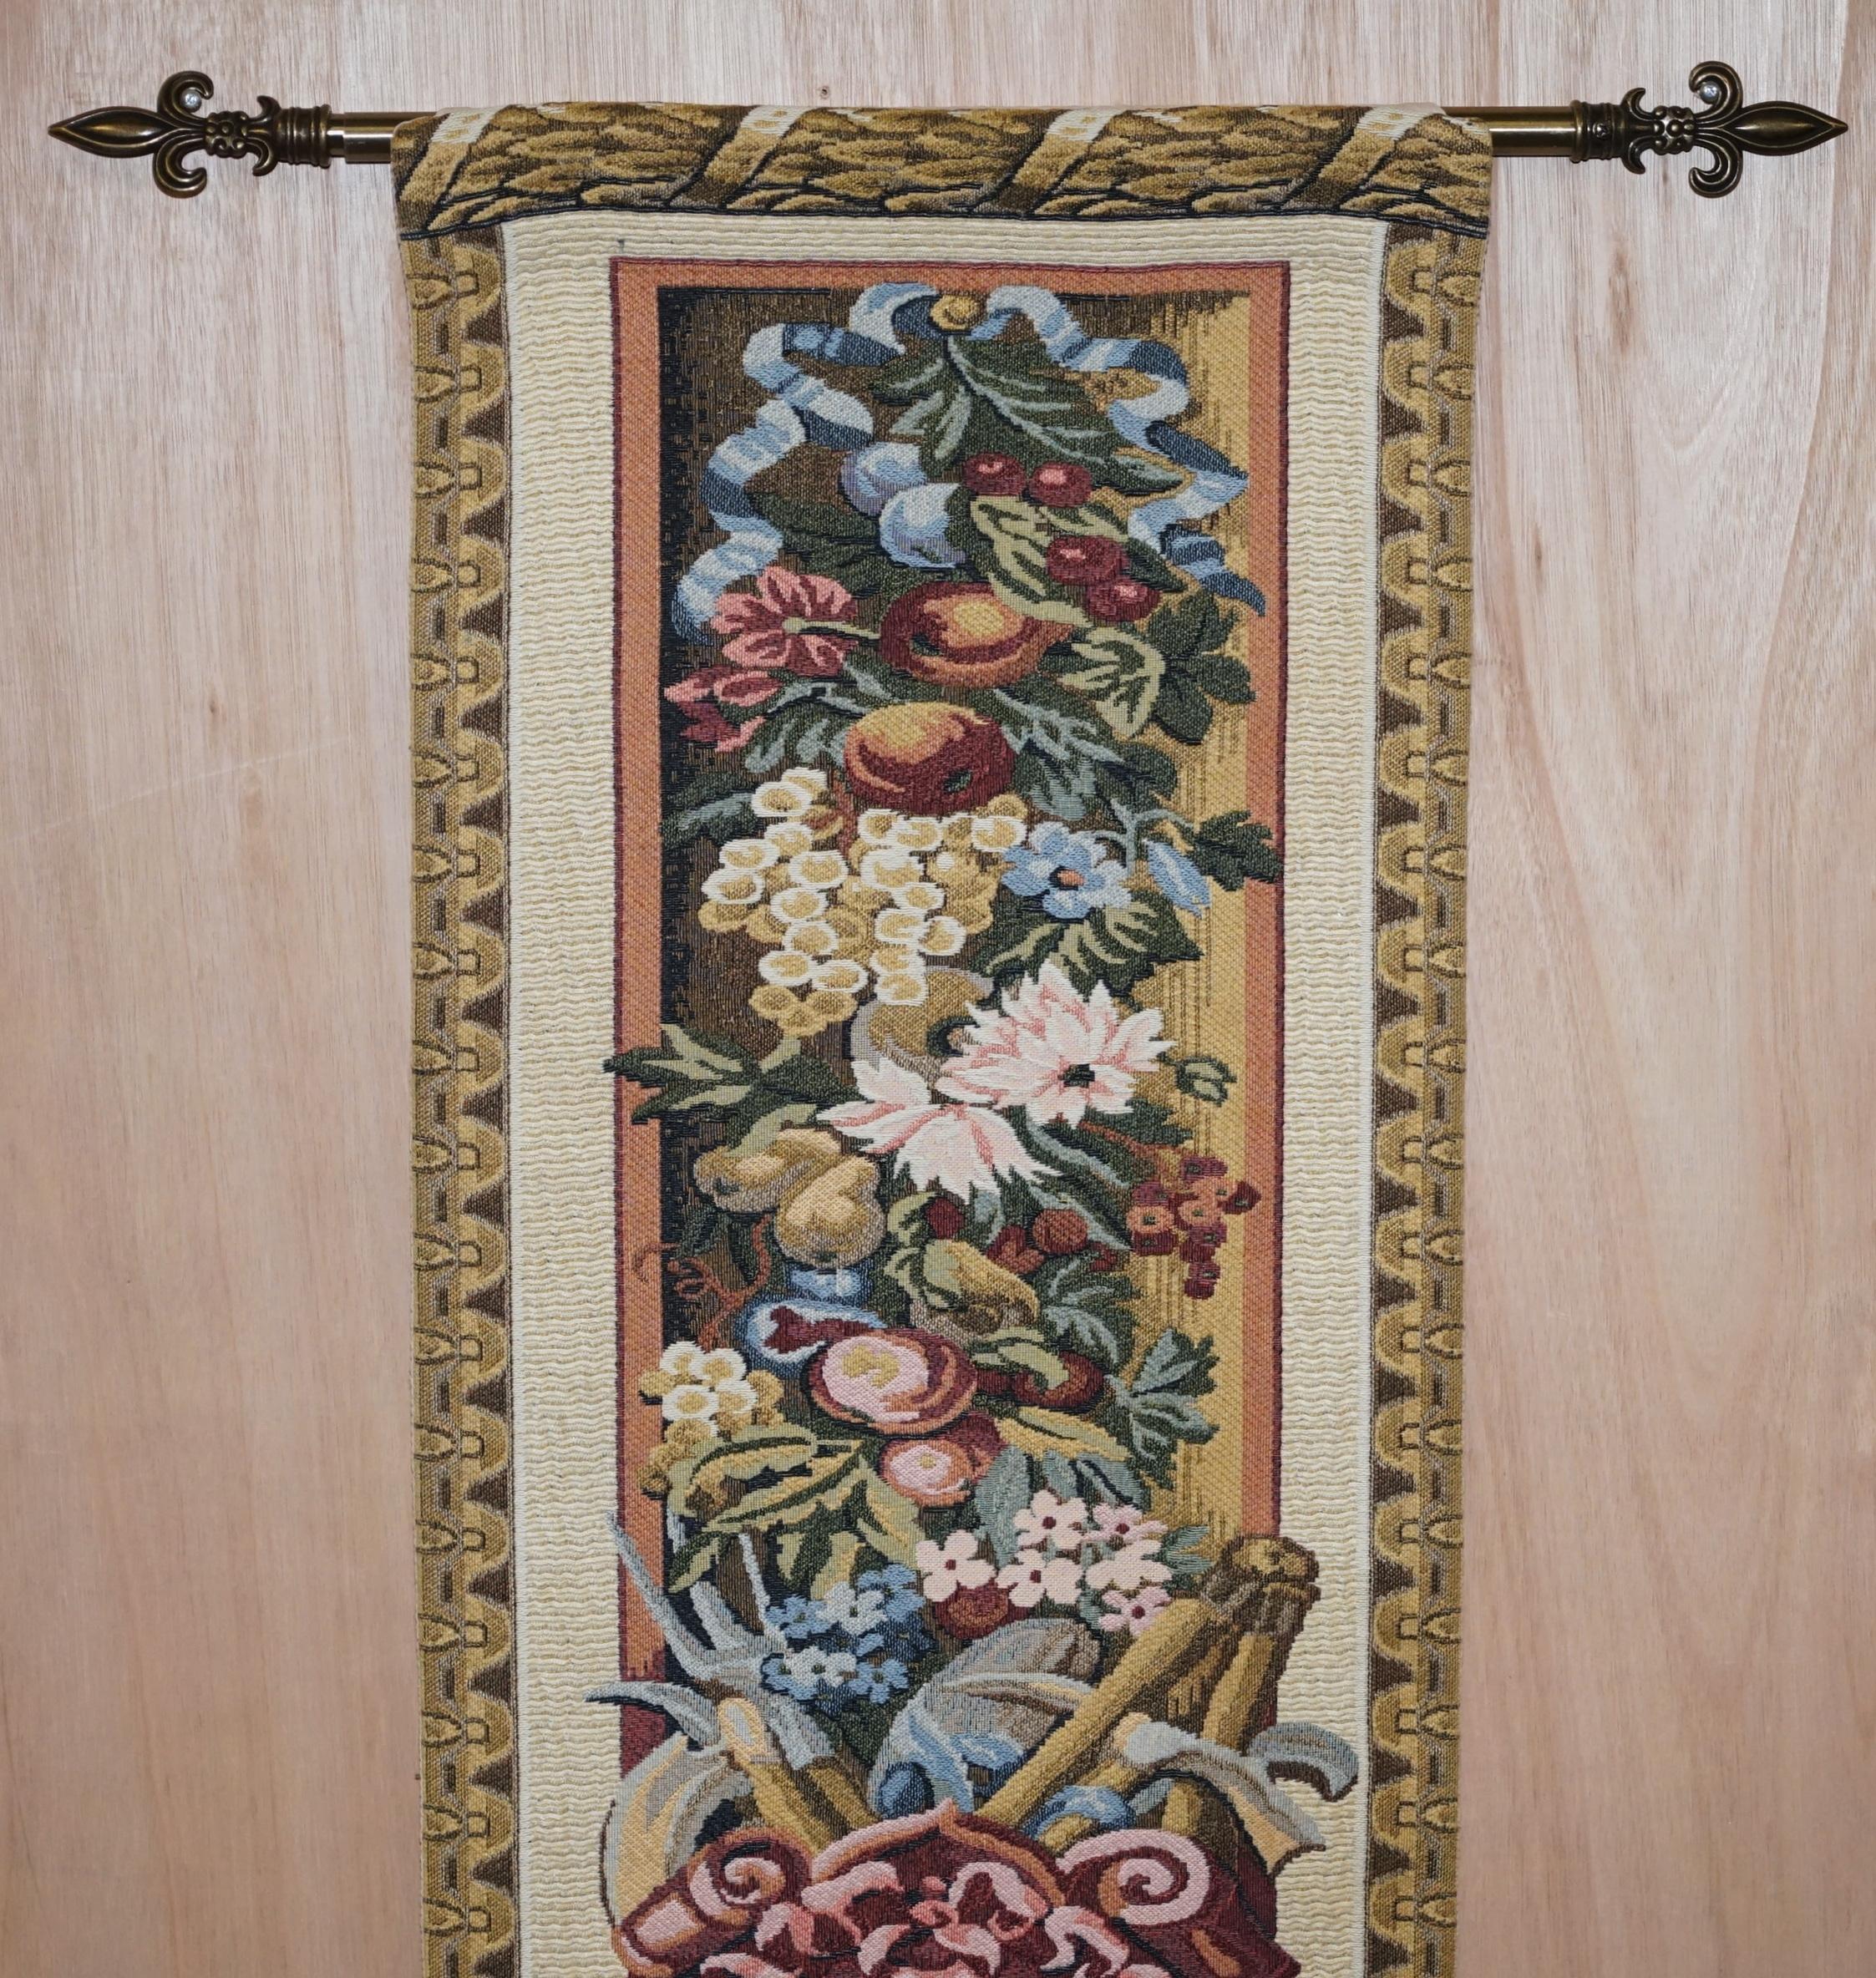 We are delighted to offer for sale this lovely vintage wall hanging tapestry with Armorial crest

A very good looking and decorative vintage piece, the embroidery is to a high standard and depicts an Armorial crest of sorts

The rail is